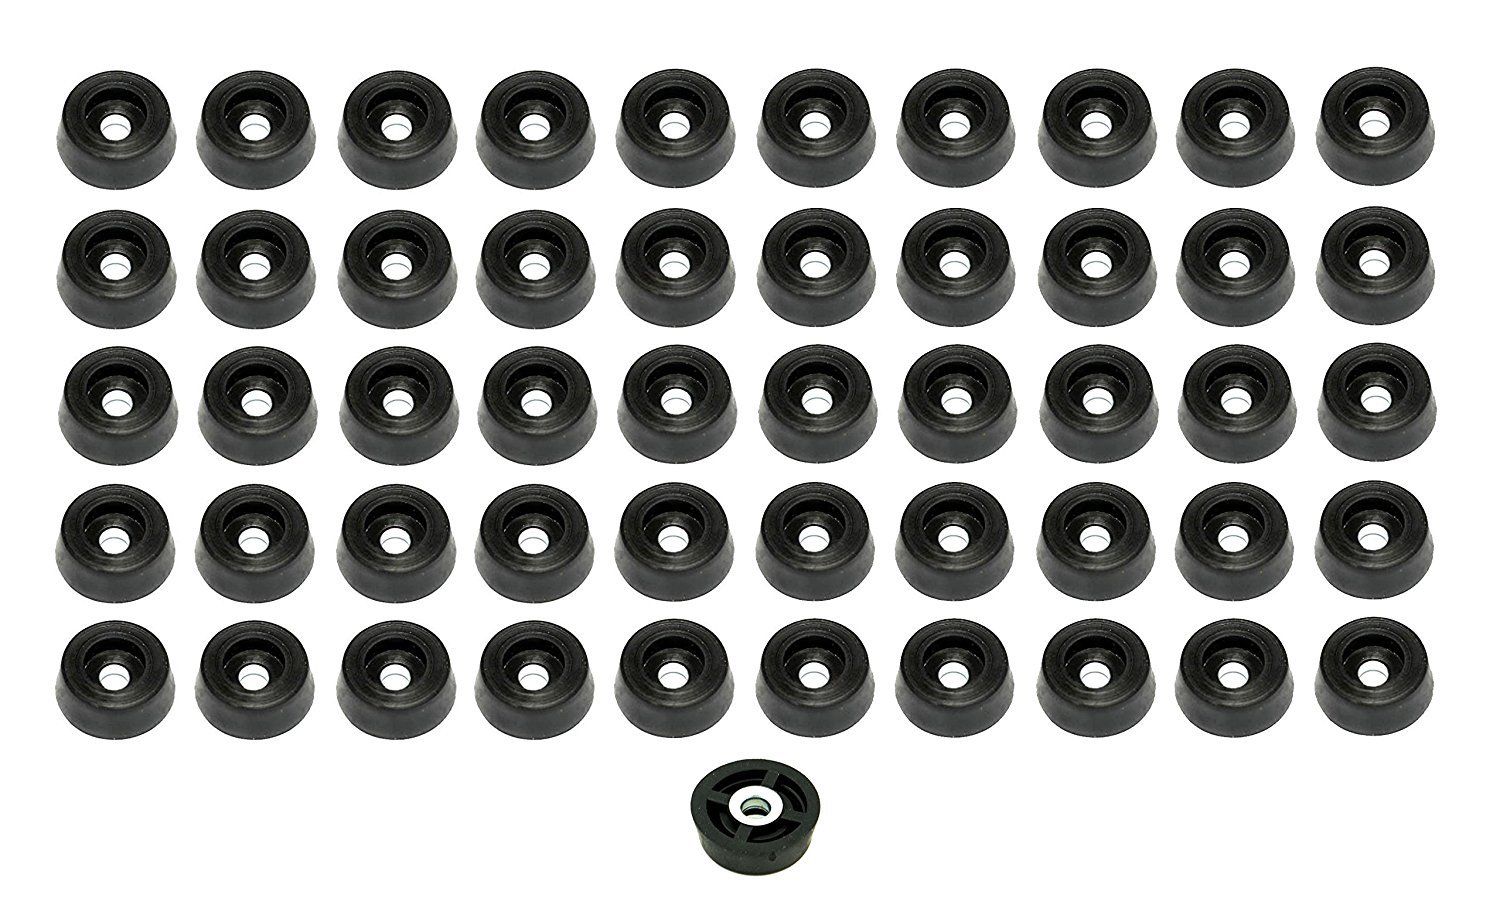 50 Small Round Rubber Feet  - 0.250 H x 0.671 D